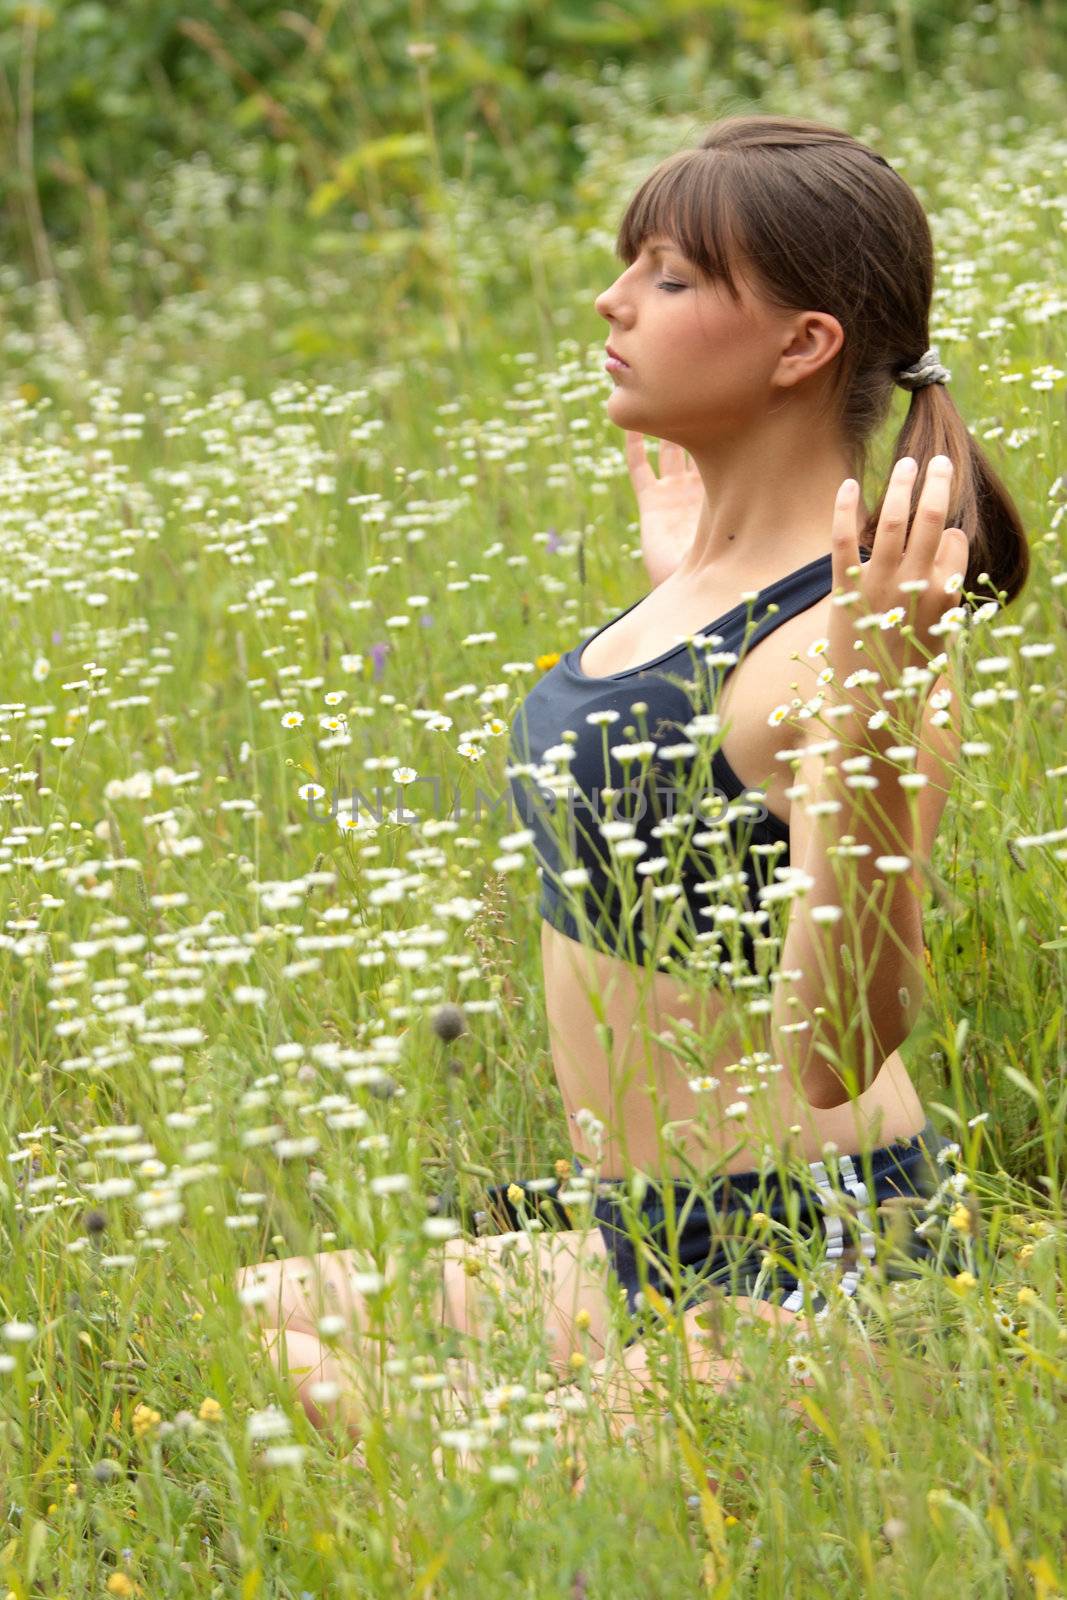 A young woman doing yoga outside in natural environment